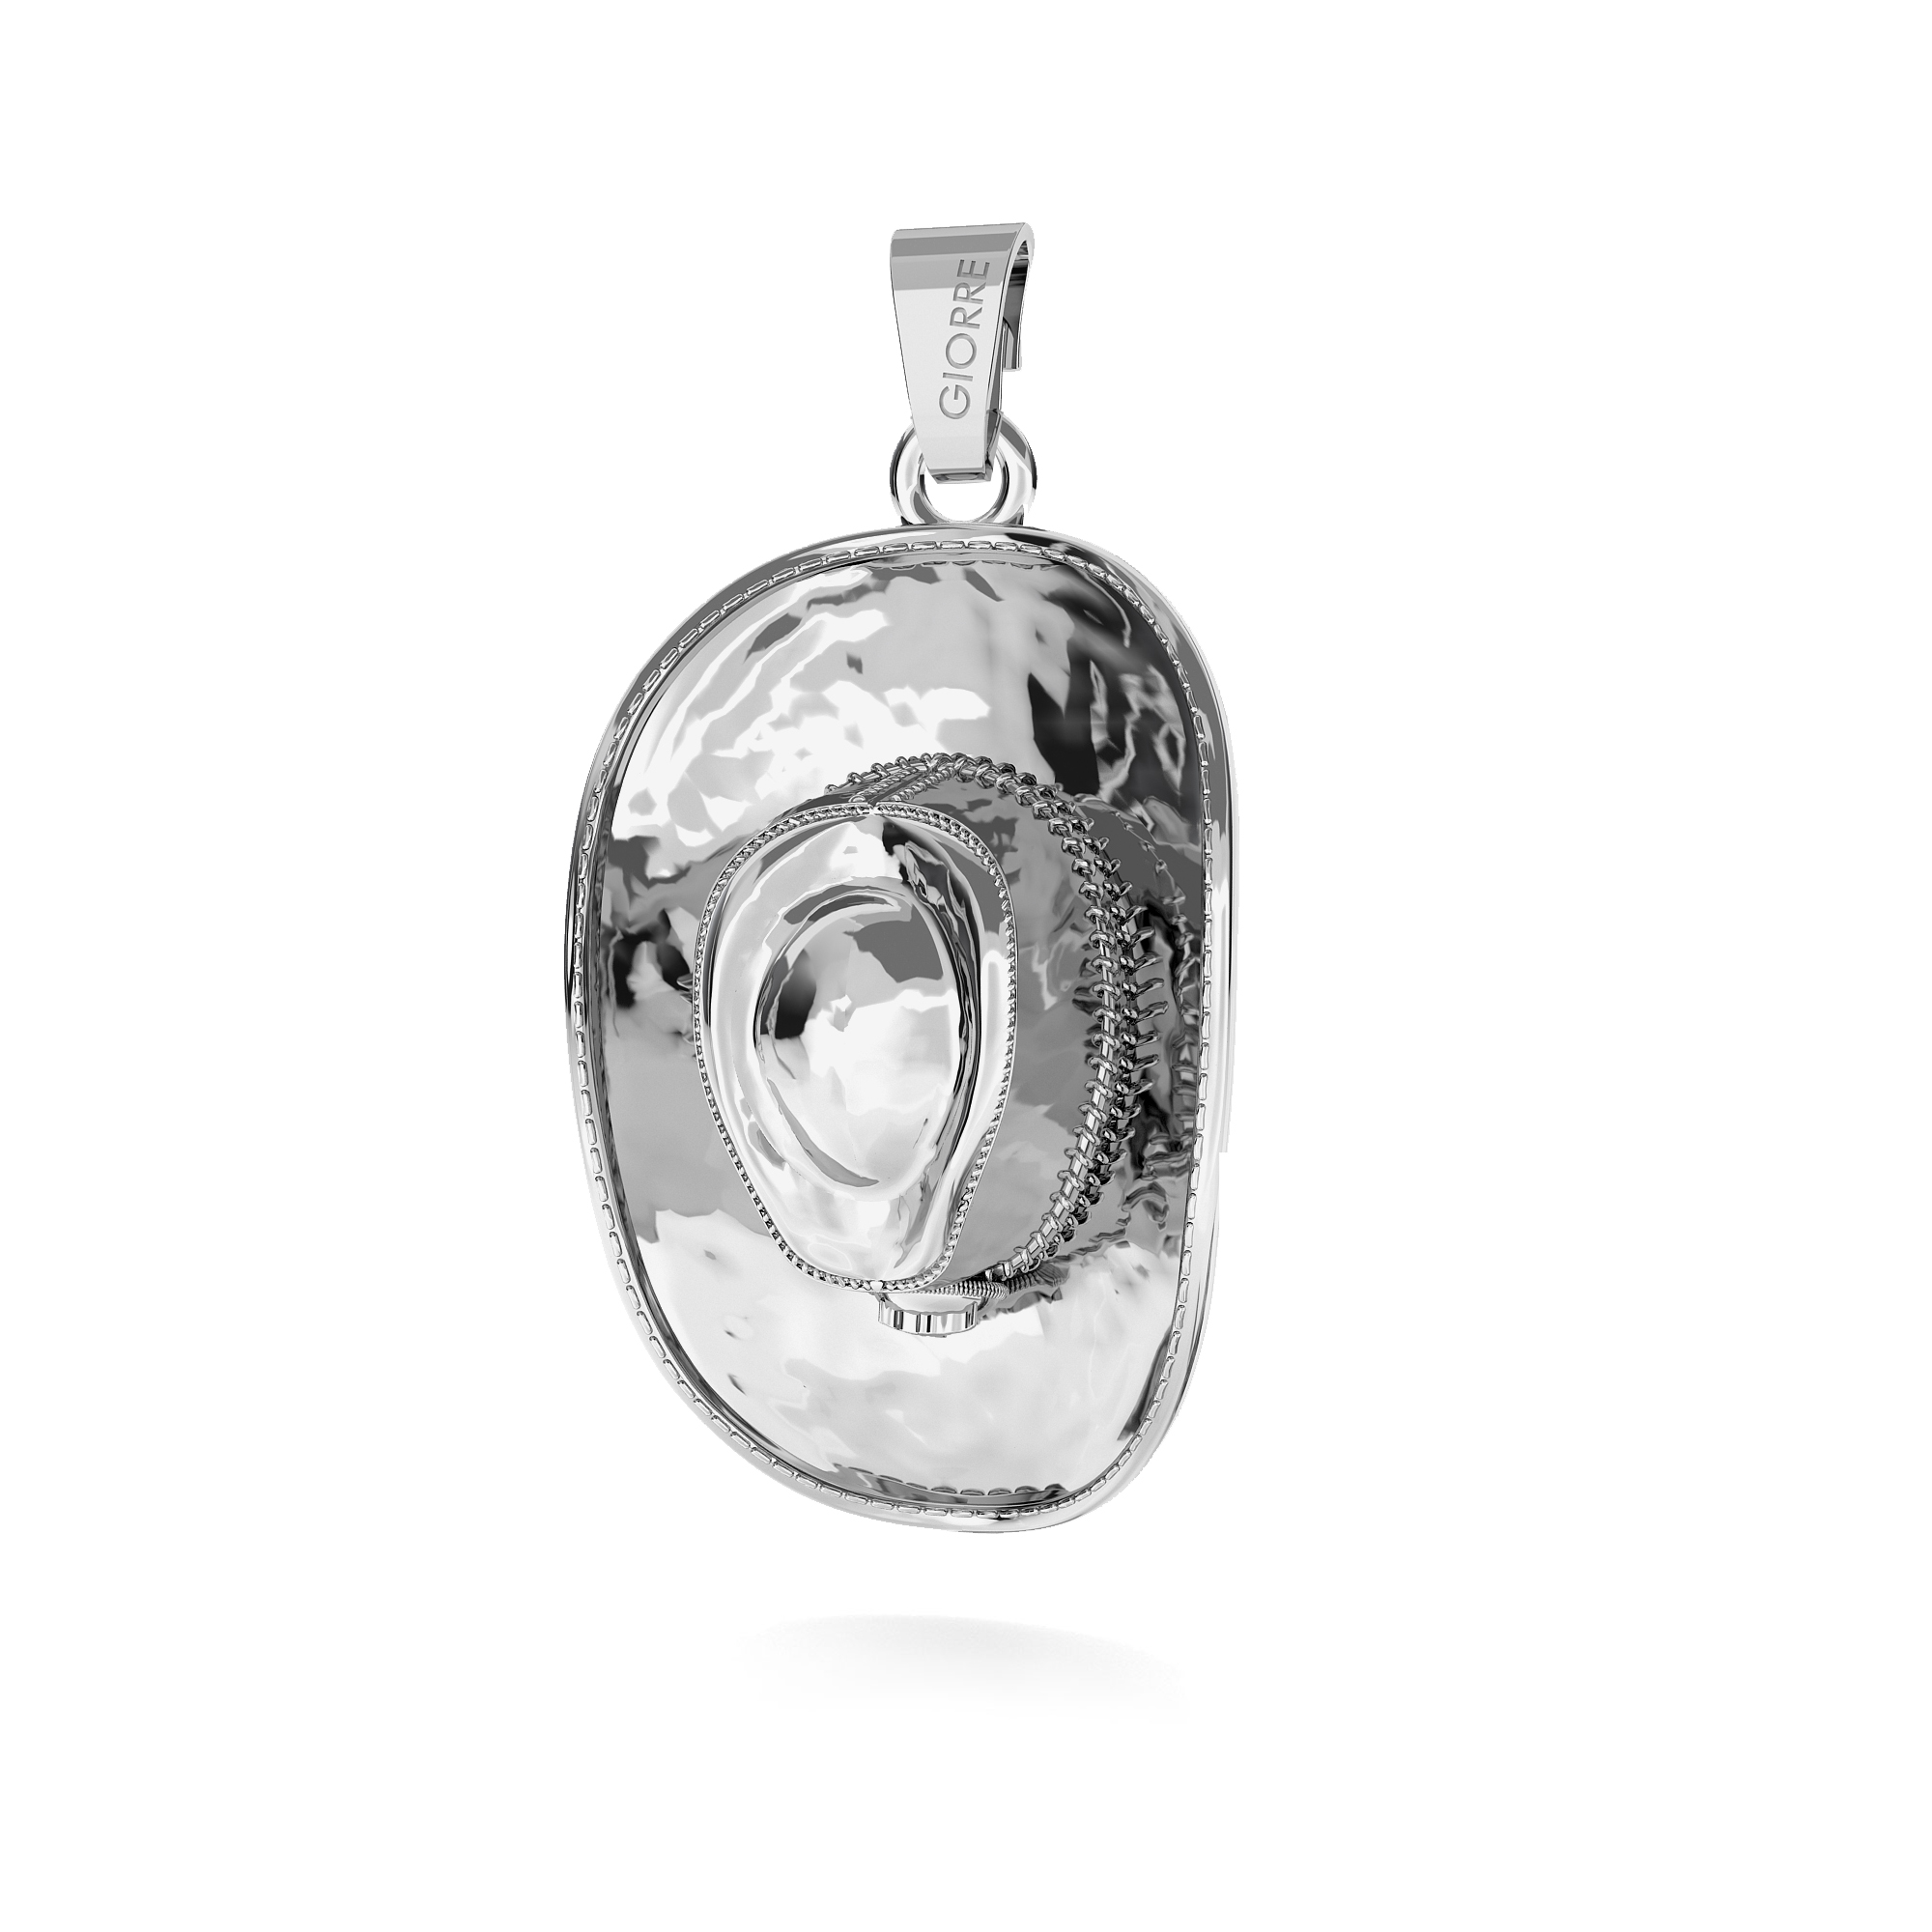 REVOLVER PENDANT CHARMS BEAD STERLING SILVER